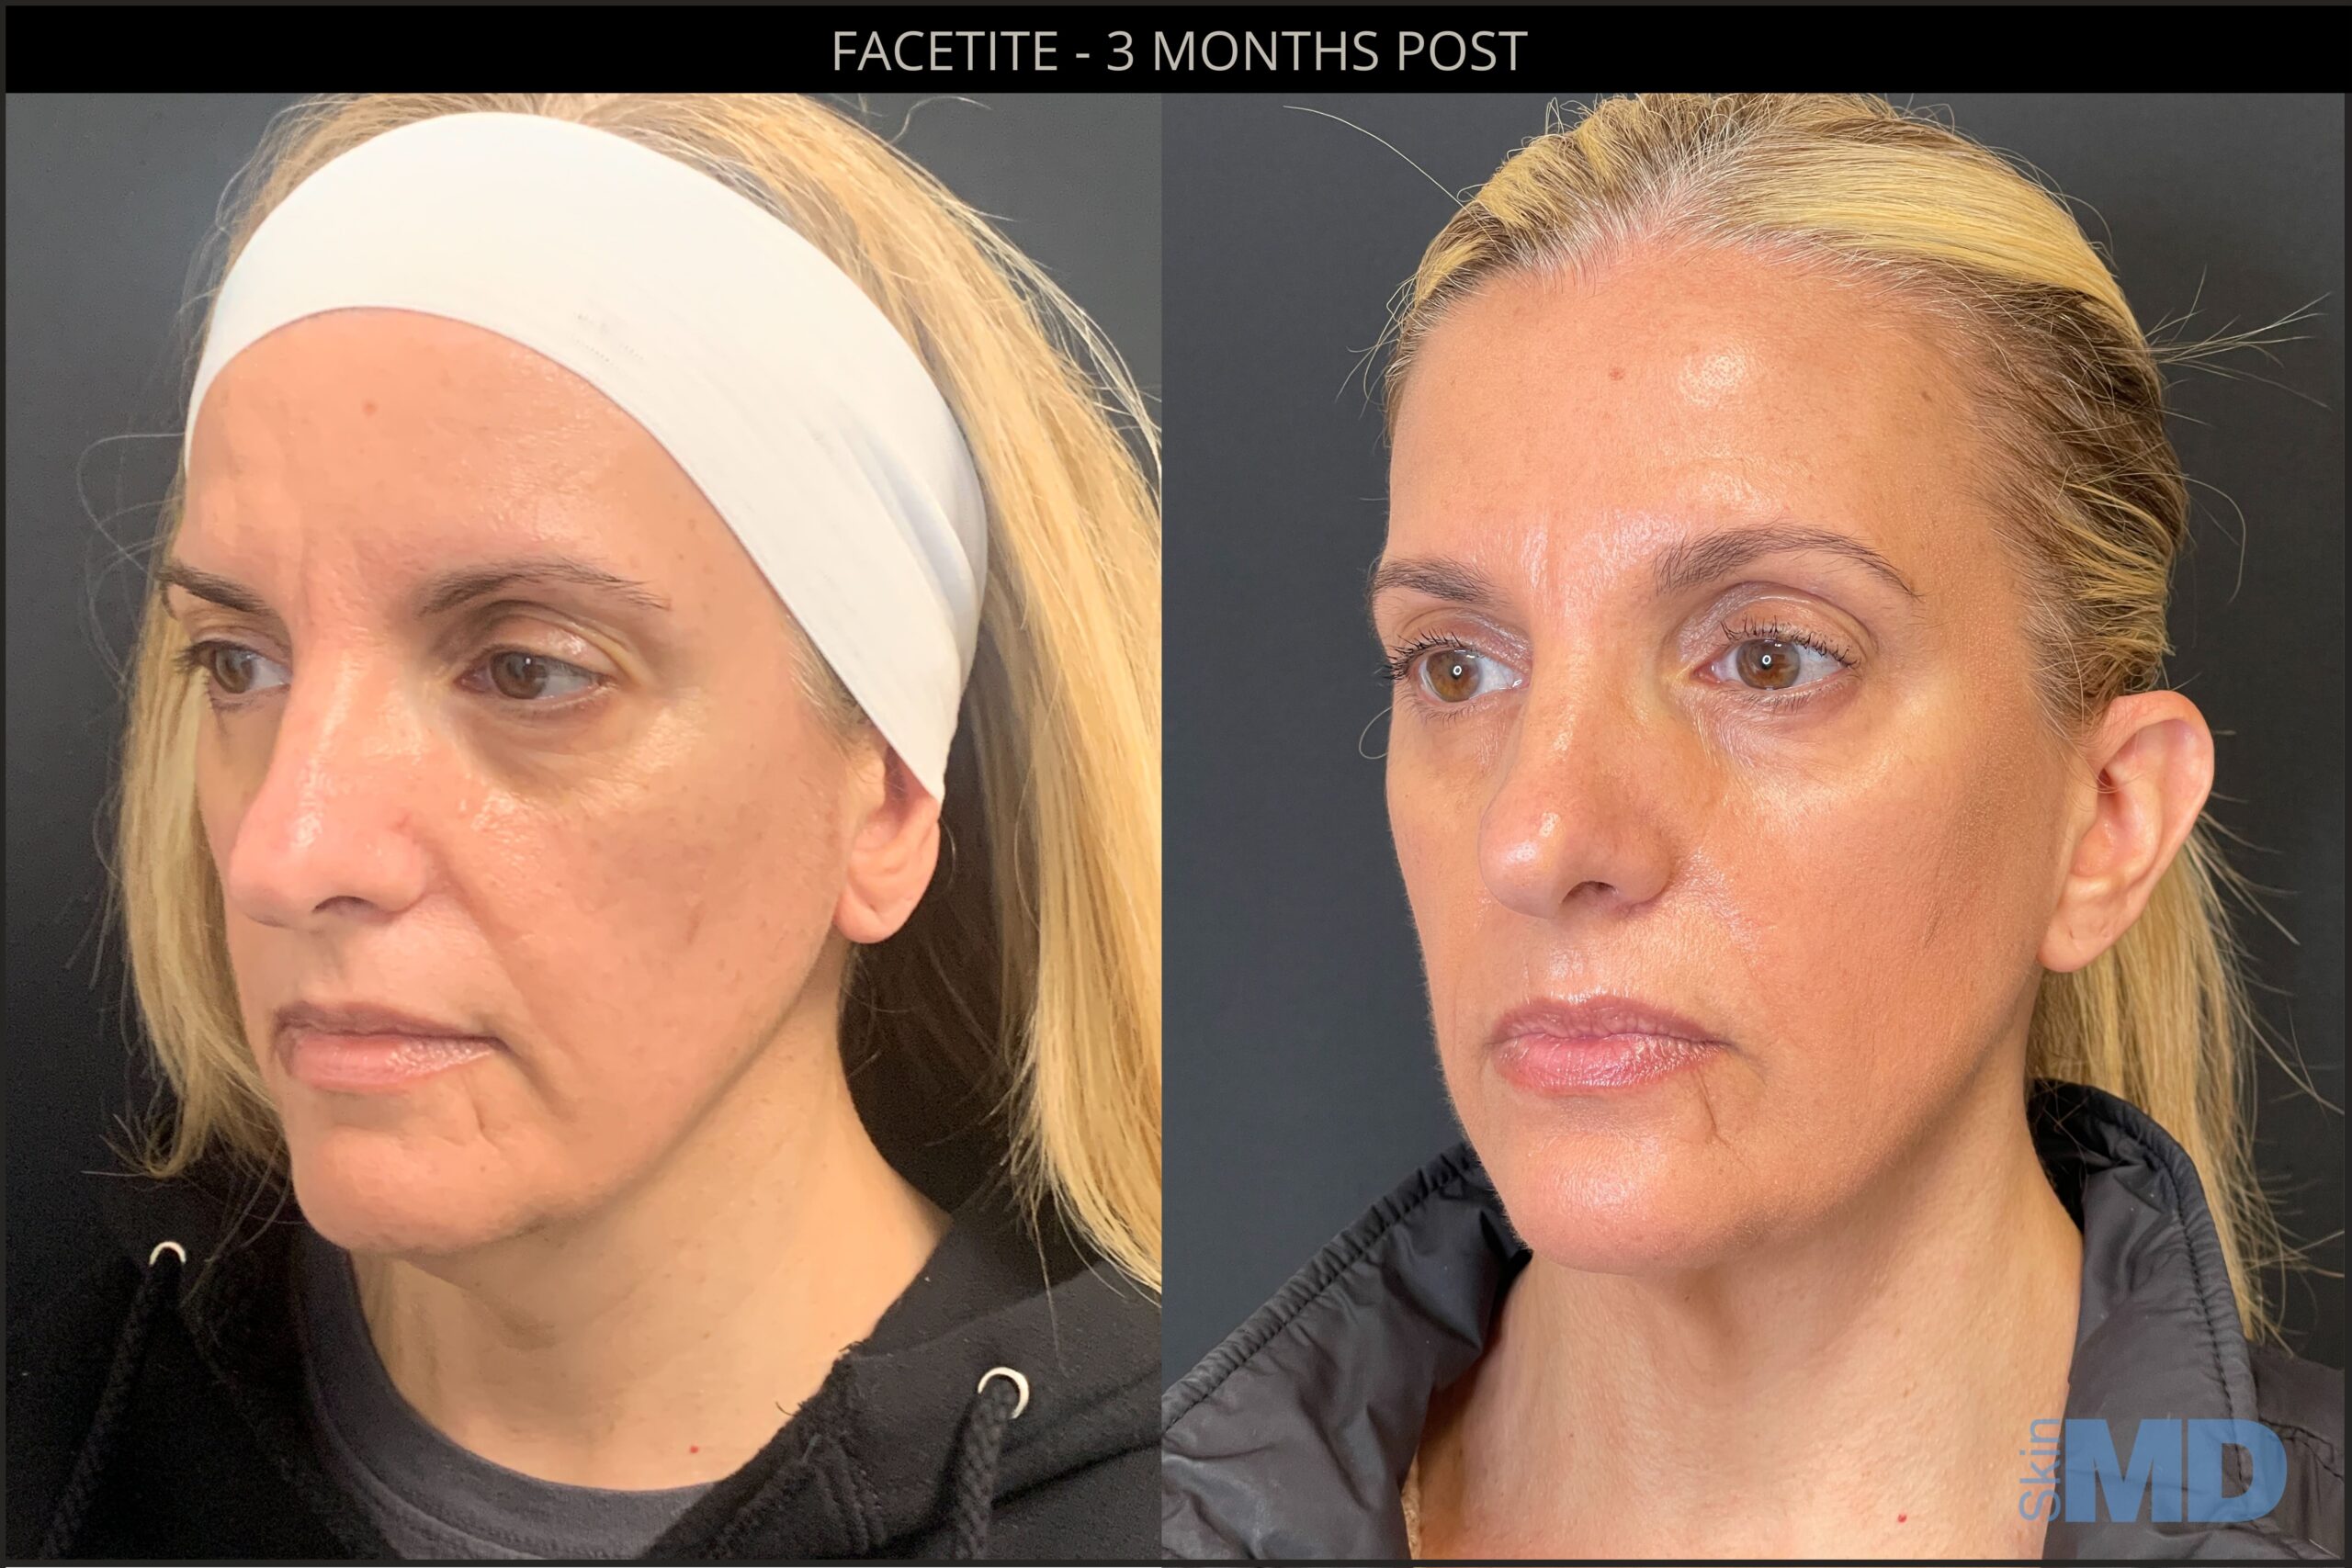 Before and after Facetite results